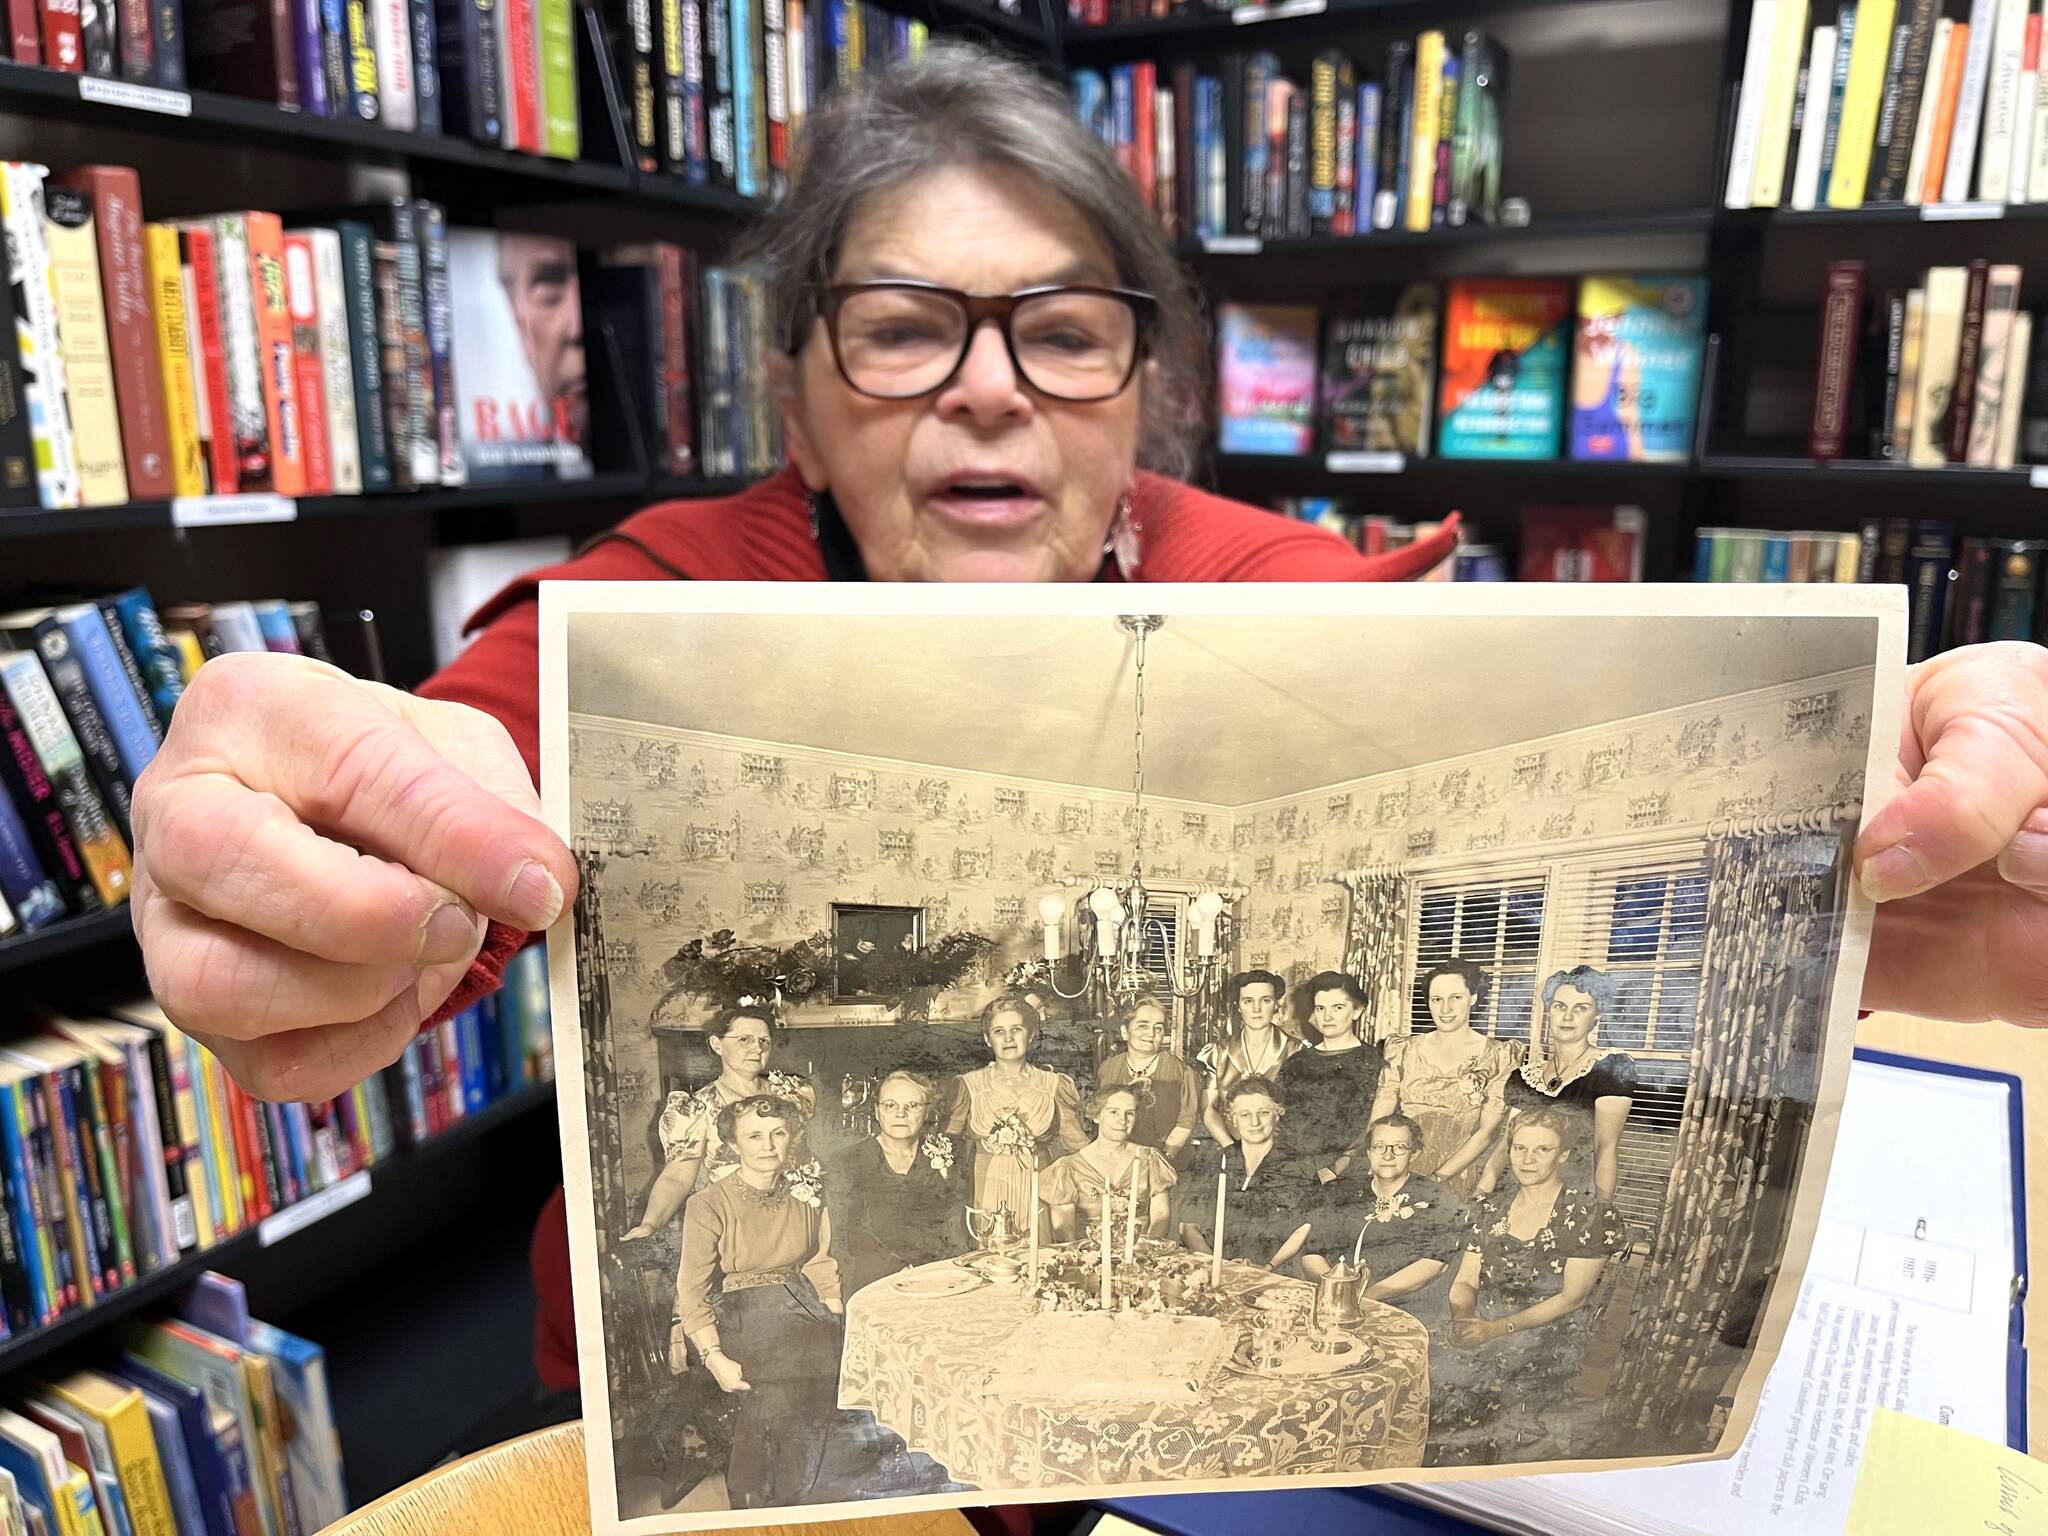 Joni Hildreth, a longtime member of the Monday Study Club, reads the caption on an archival photo from the 25th anniversary of the 107-year club. The club welcomes women who wish to spend significant time researching on interesting topics. After the research is done and a paper is written, they present their findings. Hildreth and her fellow members are happy to be part of a club where they can learn and socialize with other high-minded people. (Matthew N. Wells / The Daily World)